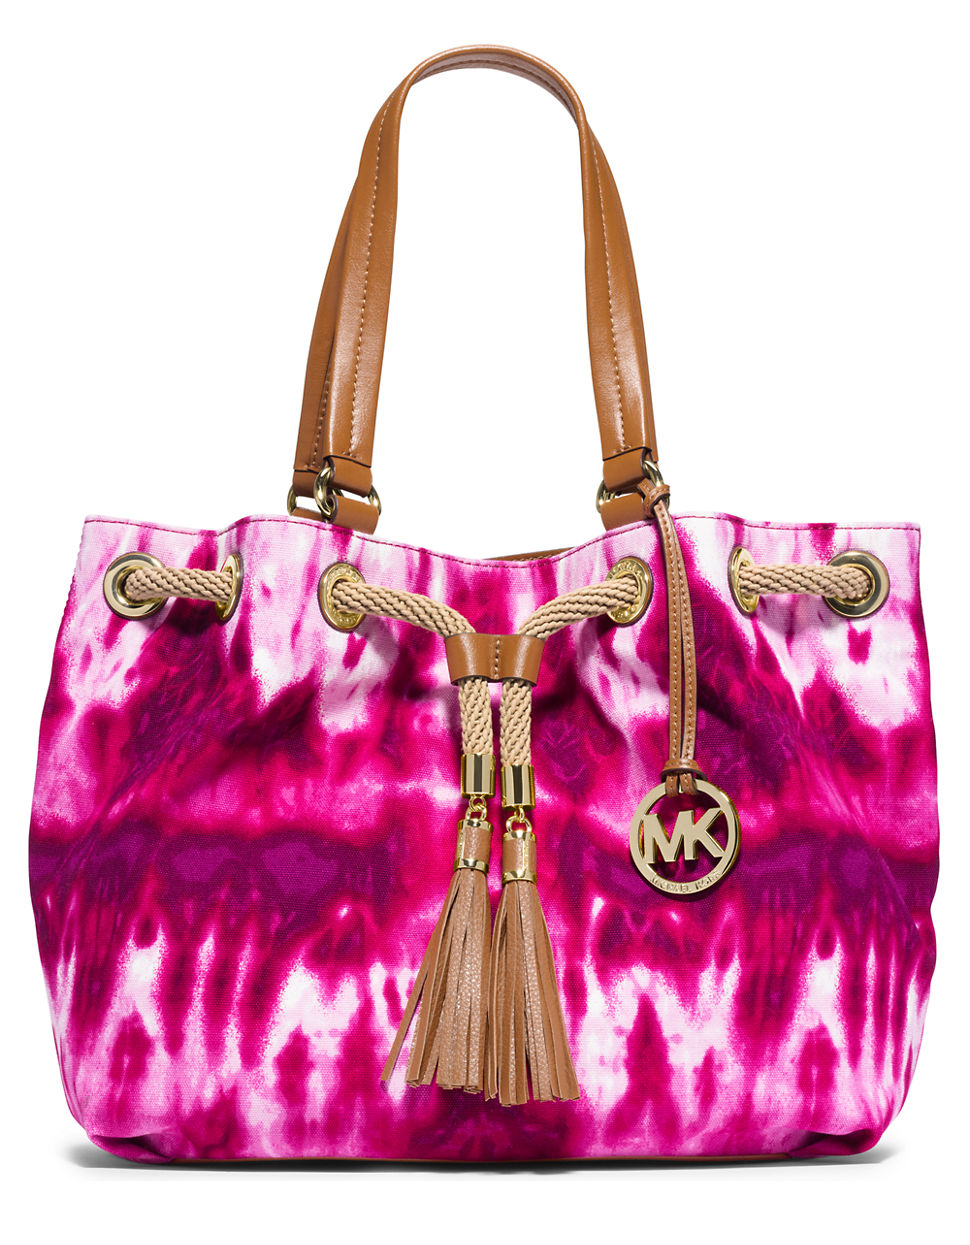 Lyst - Michael Michael Kors Marina Tie Dye Large Gathered Tote in Pink